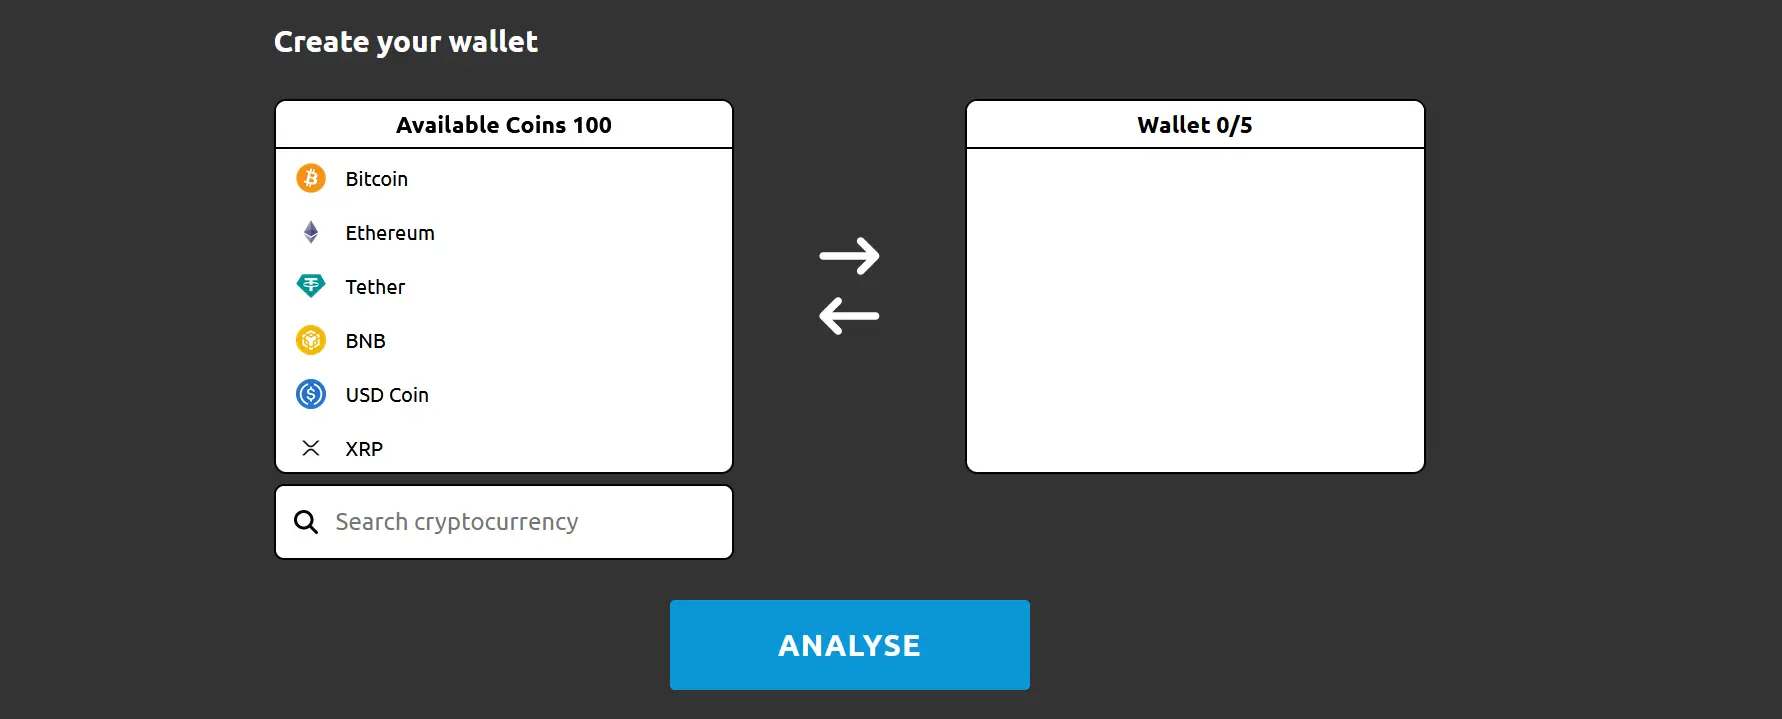 On the image you can see a our form to generate cryptocurrency wallet